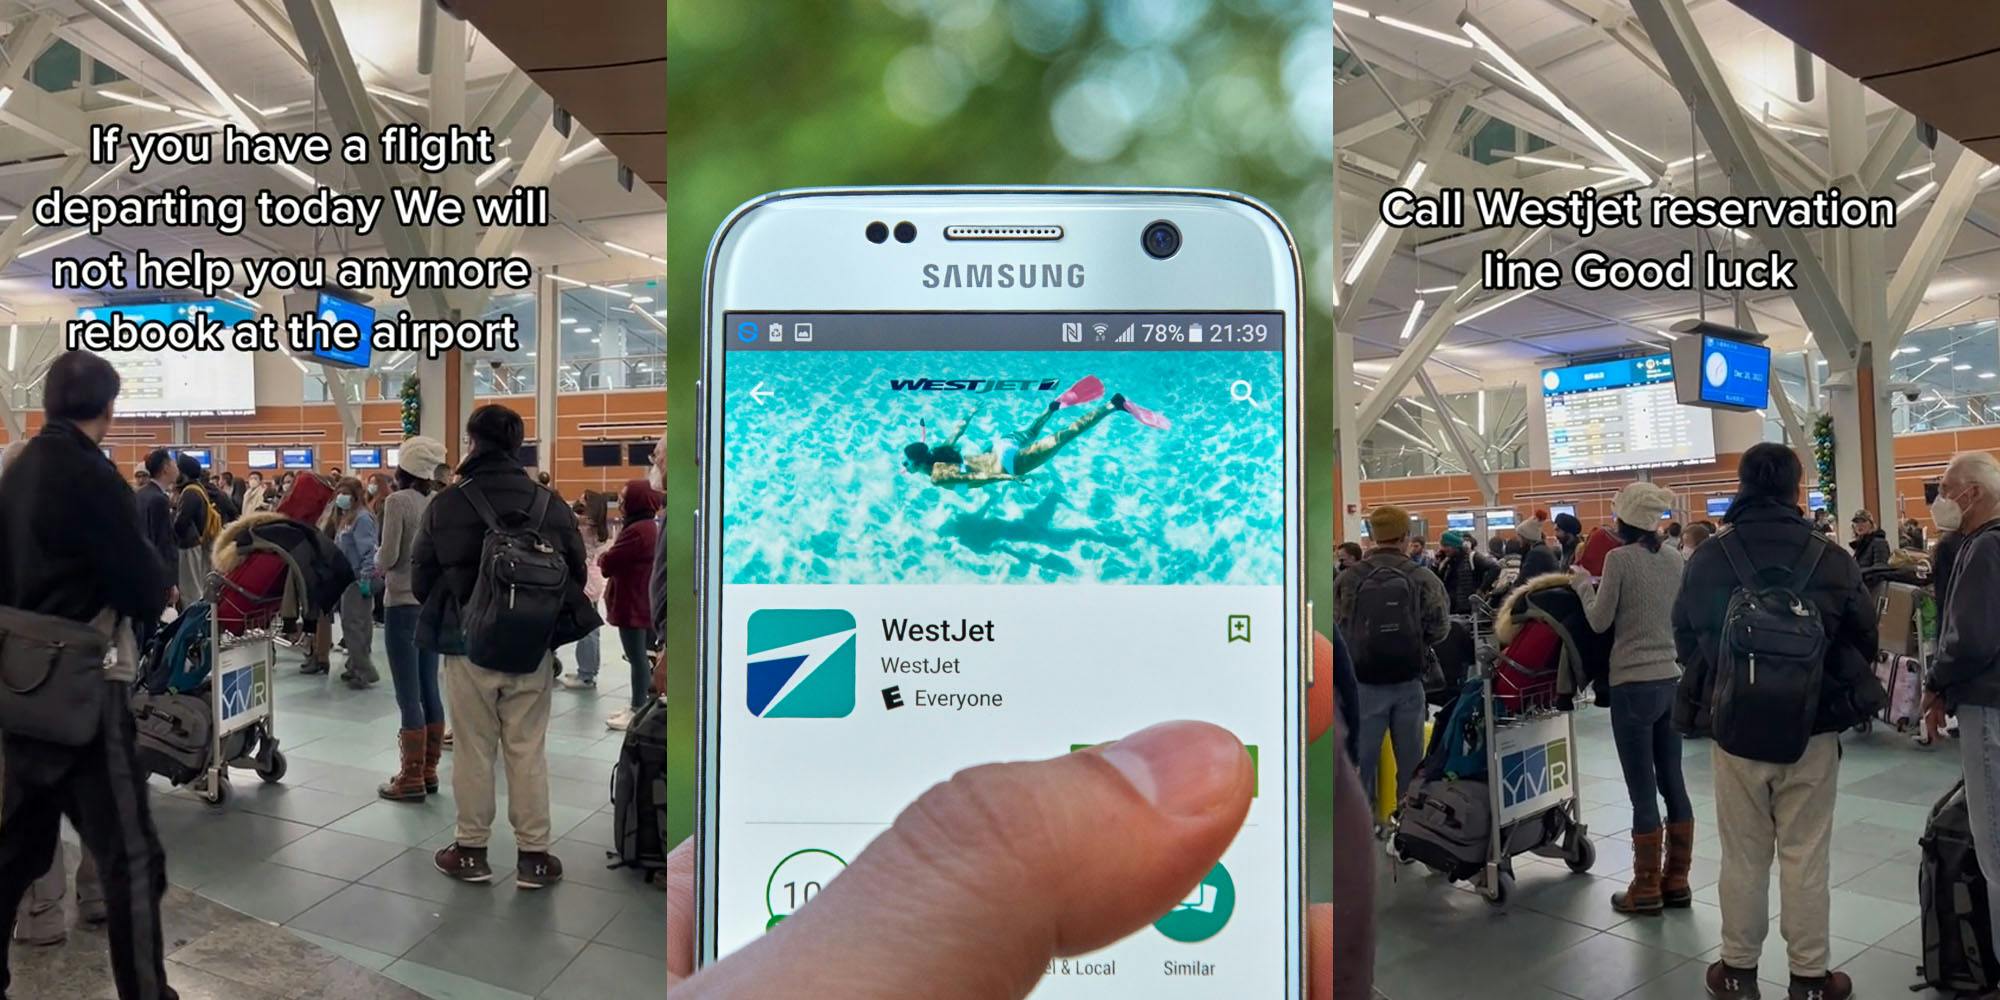 people standing in airport caption "If you have a flight departing today we will not help you anymore rebook at the airport" (l) hand holding phone with West Jet app in appstore in front of green blurred background (c) people standing in airport caption "Call WestJet reservation line Good Luck" (r)